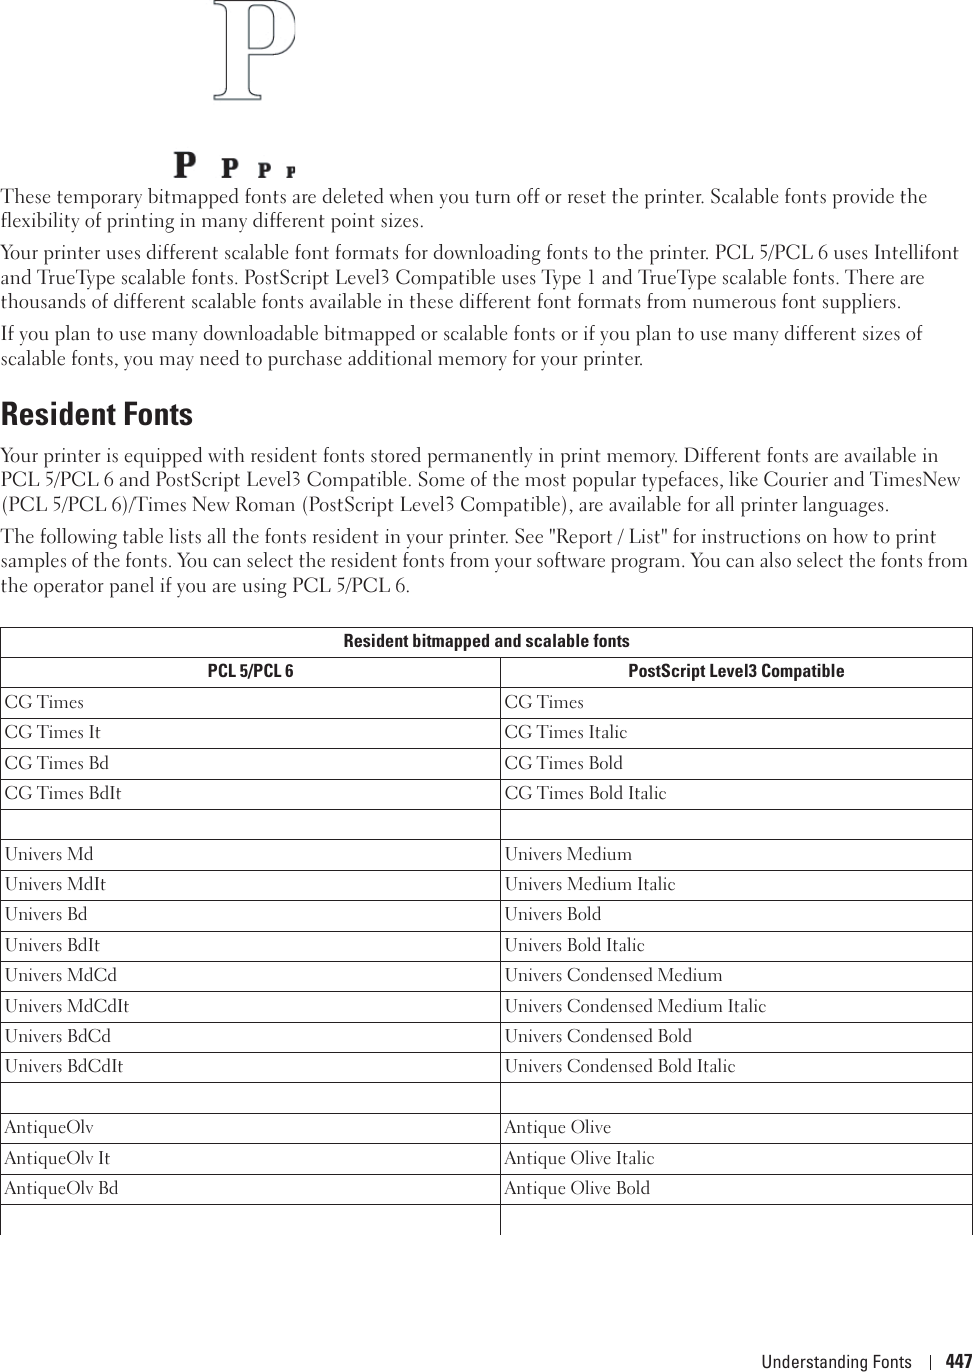 Understanding Fonts 447These temporary bitmapped fonts are deleted when you turn off or reset the printer. Scalable fonts provide the flexibility of printing in many different point sizes.Your printer uses different scalable font formats for downloading fonts to the printer. PCL 5/PCL 6 uses Intellifont and TrueType scalable fonts. PostScript Level3 Compatible uses Type 1 and TrueType scalable fonts. There are thousands of different scalable fonts available in these different font formats from numerous font suppliers.If you plan to use many downloadable bitmapped or scalable fonts or if you plan to use many different sizes of scalable fonts, you may need to purchase additional memory for your printer.Resident FontsYour printer is equipped with resident fonts stored permanently in print memory. Different fonts are available in PCL 5/PCL 6 and PostScript Level3 Compatible. Some of the most popular typefaces, like Courier and TimesNew (PCL 5/PCL 6)/Times New Roman (PostScript Level3 Compatible), are available for all printer languages.The following table lists all the fonts resident in your printer. See &quot;Report / List&quot; for instructions on how to print samples of the fonts. You can select the resident fonts from your software program. You can also select the fonts from the operator panel if you are using PCL 5/PCL 6.Resident bitmapped and scalable fontsPCL 5/PCL 6 PostScript Level3 CompatibleCG Times CG TimesCG Times It CG Times ItalicCG Times Bd CG Times BoldCG Times BdIt CG Times Bold ItalicUnivers Md Univers MediumUnivers MdIt Univers Medium ItalicUnivers Bd Univers BoldUnivers BdIt Univers Bold ItalicUnivers MdCd Univers Condensed MediumUnivers MdCdIt Univers Condensed Medium ItalicUnivers BdCd Univers Condensed BoldUnivers BdCdIt Univers Condensed Bold ItalicAntiqueOlv Antique OliveAntiqueOlv It Antique Olive ItalicAntiqueOlv Bd Antique Olive Bold